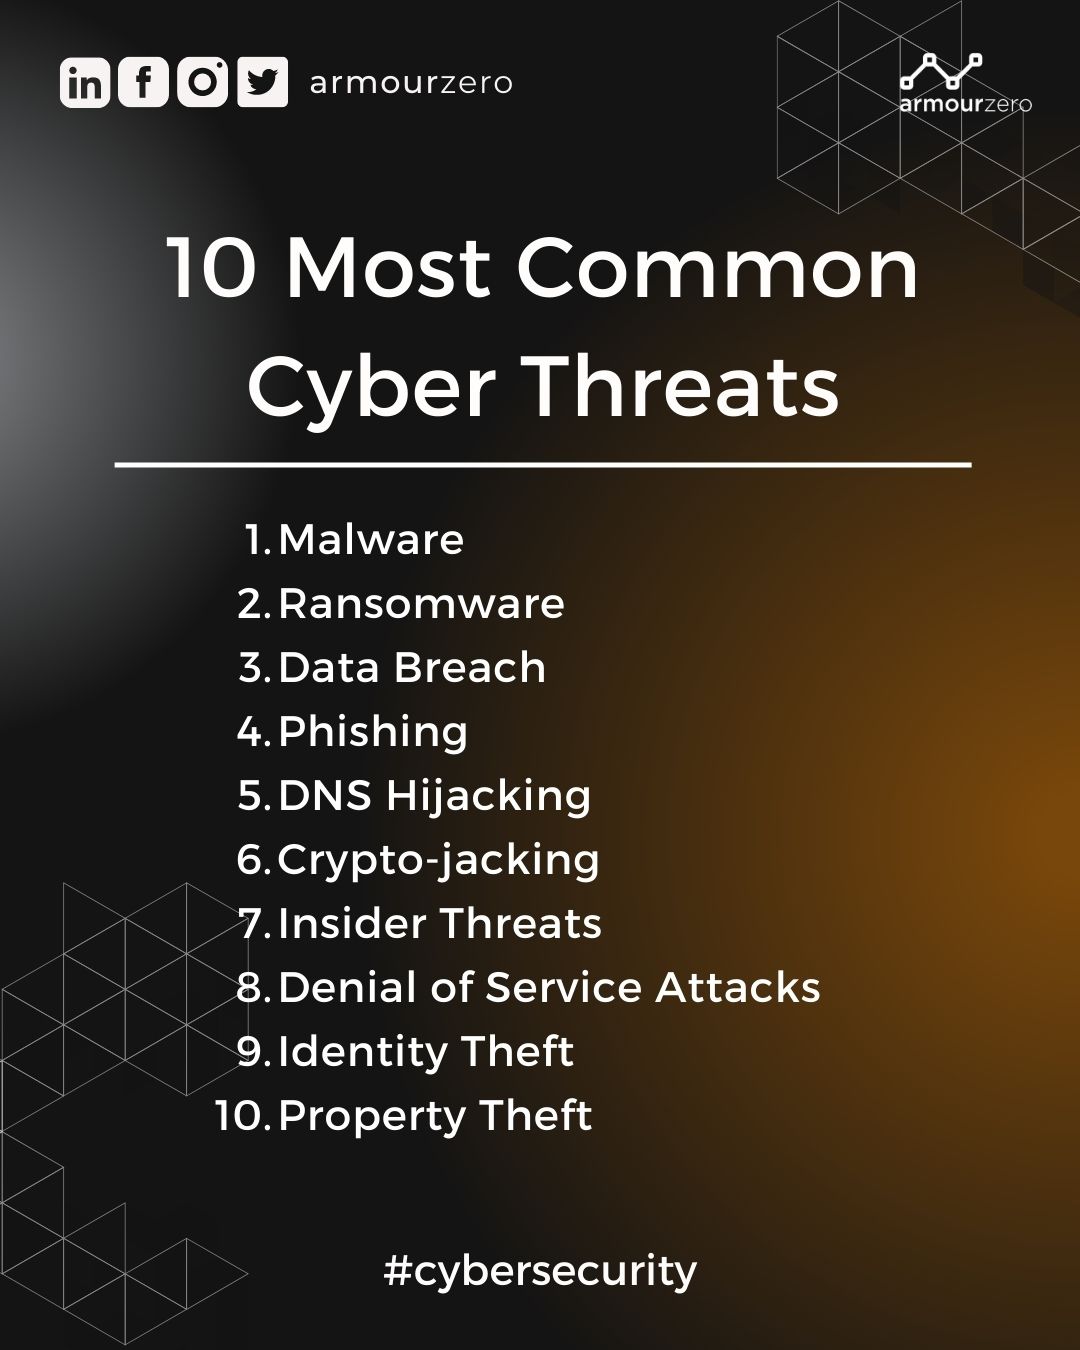 10 most common cyber threats